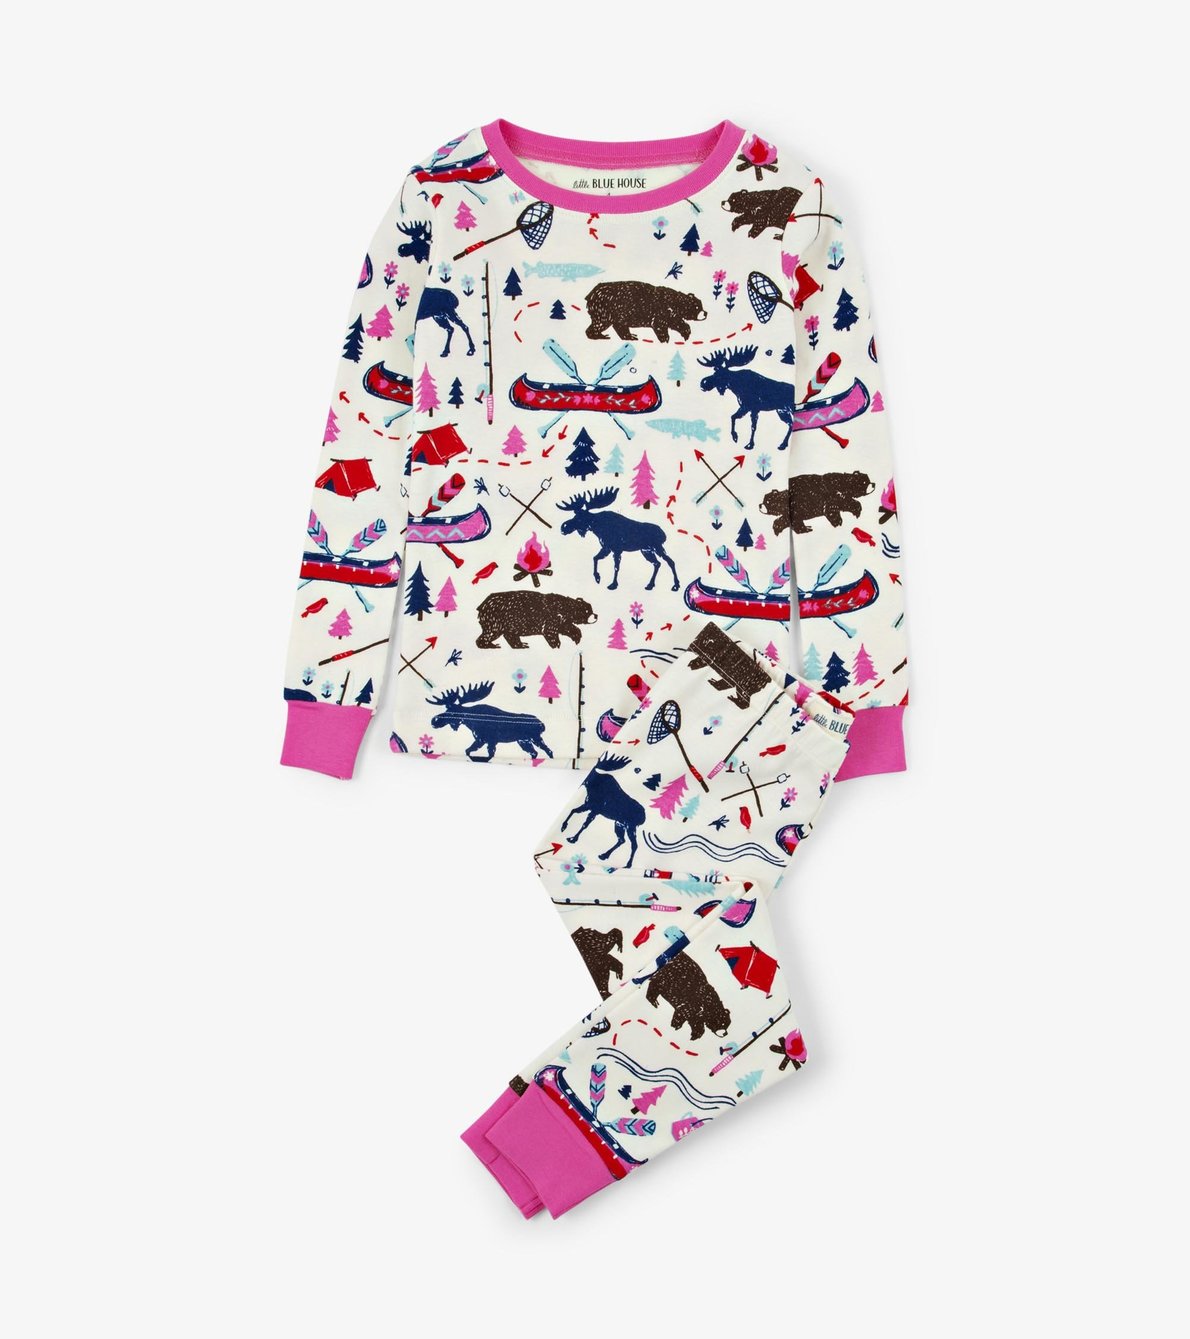 View larger image of Pretty Sketch Country Kids Pajama Set